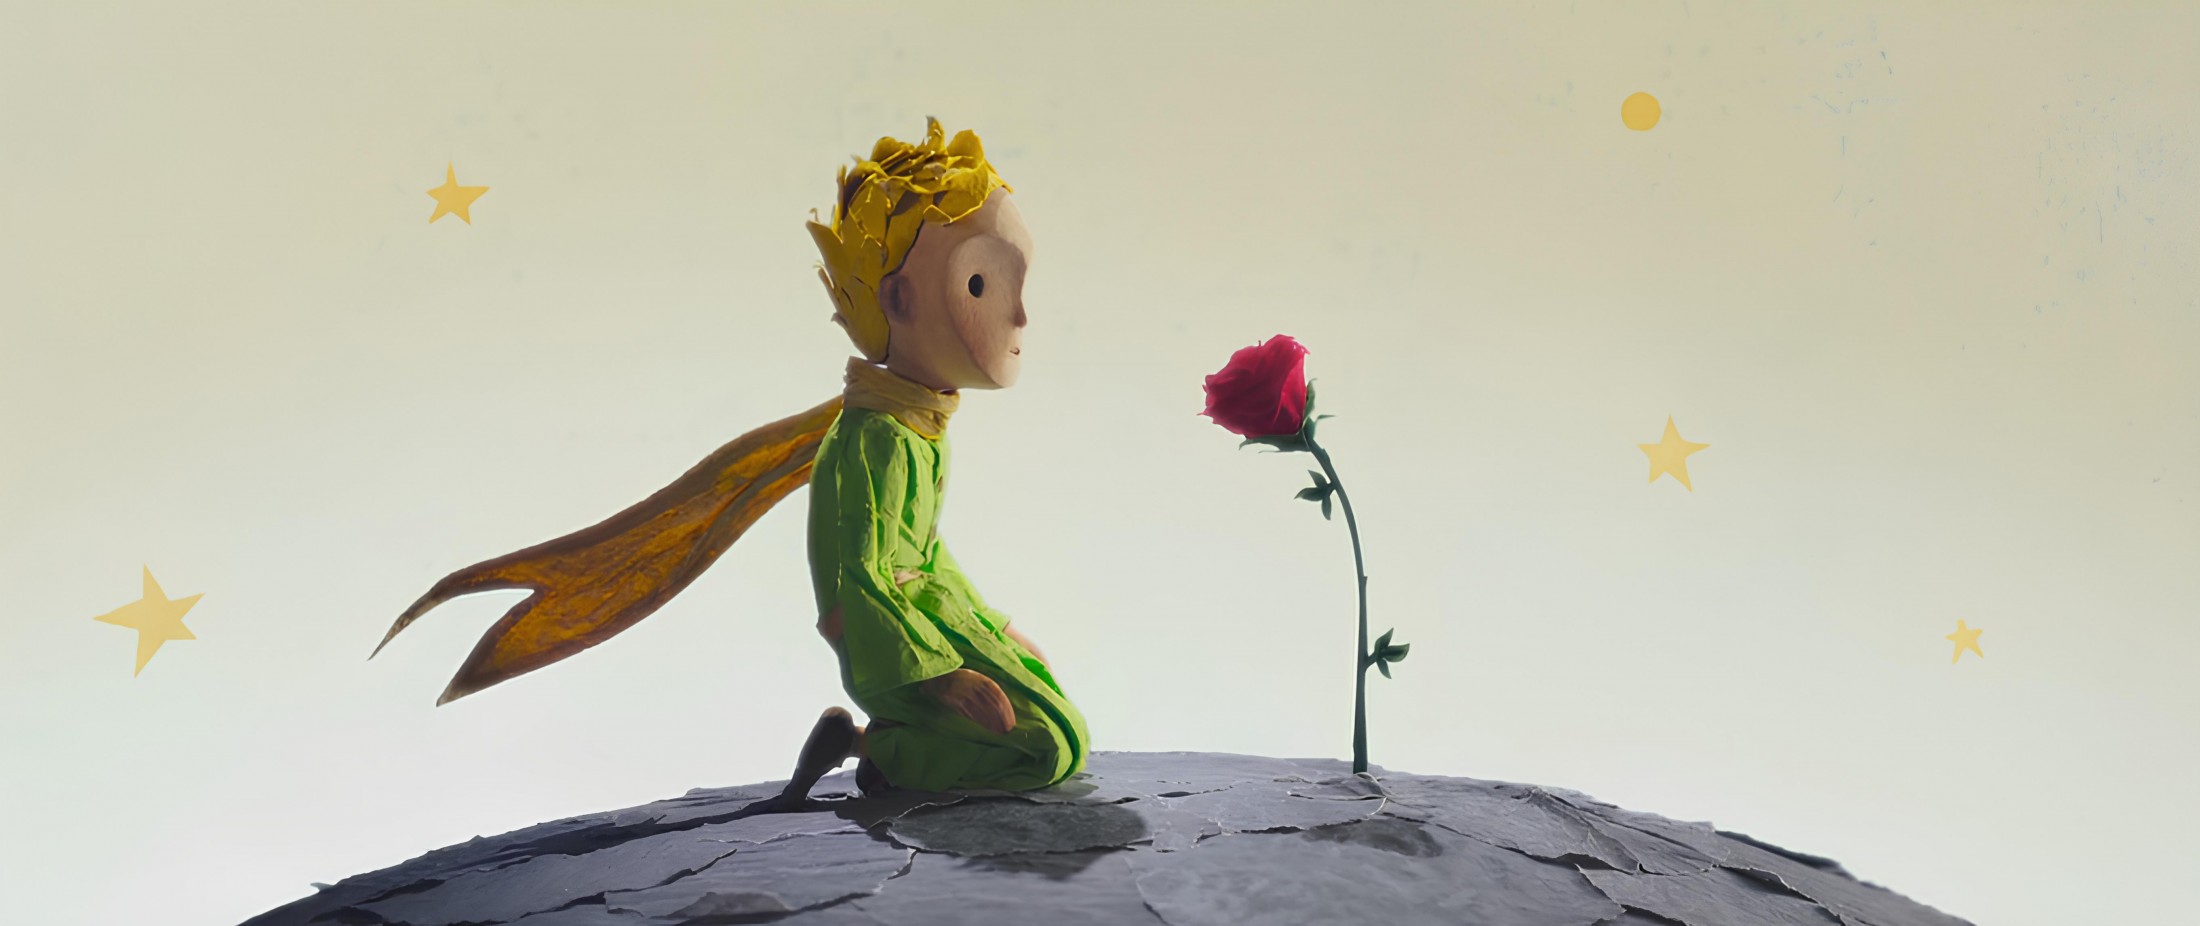 Photo of the hotel Sofitel New York: The little prince and his rose1